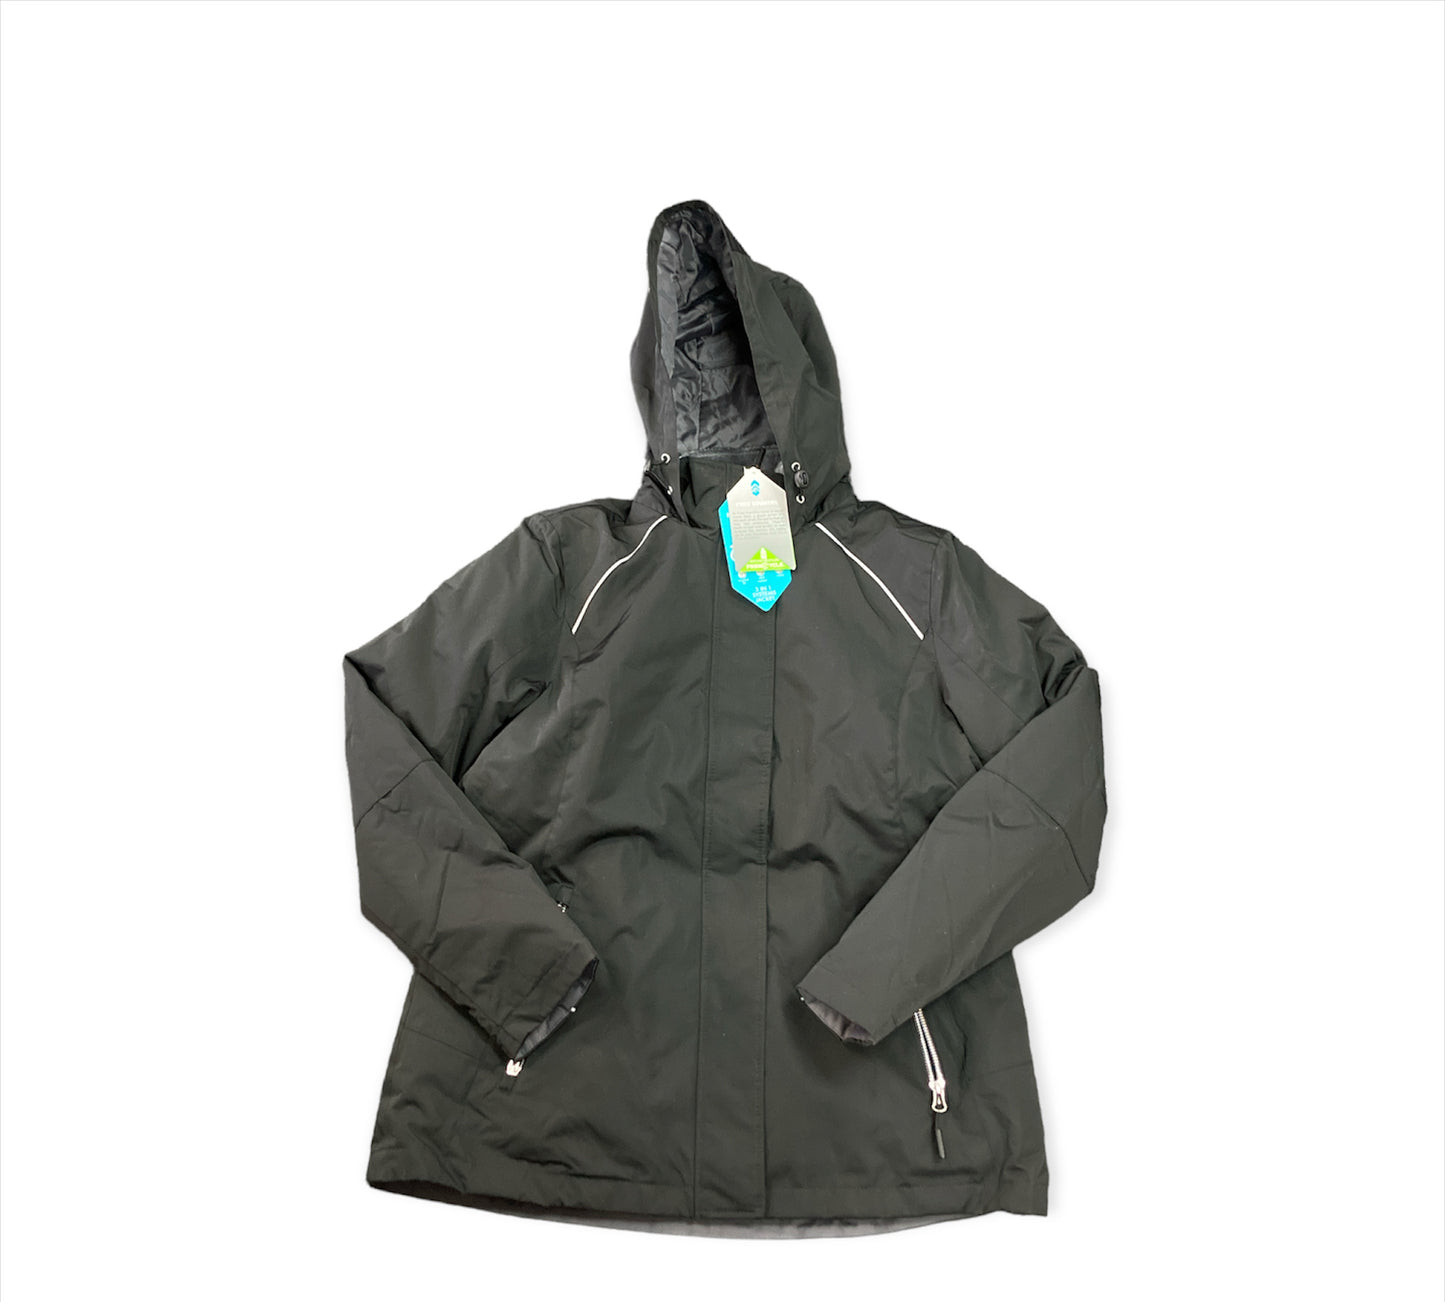 Free Country Women's 3 in 1 Summit System Jacket